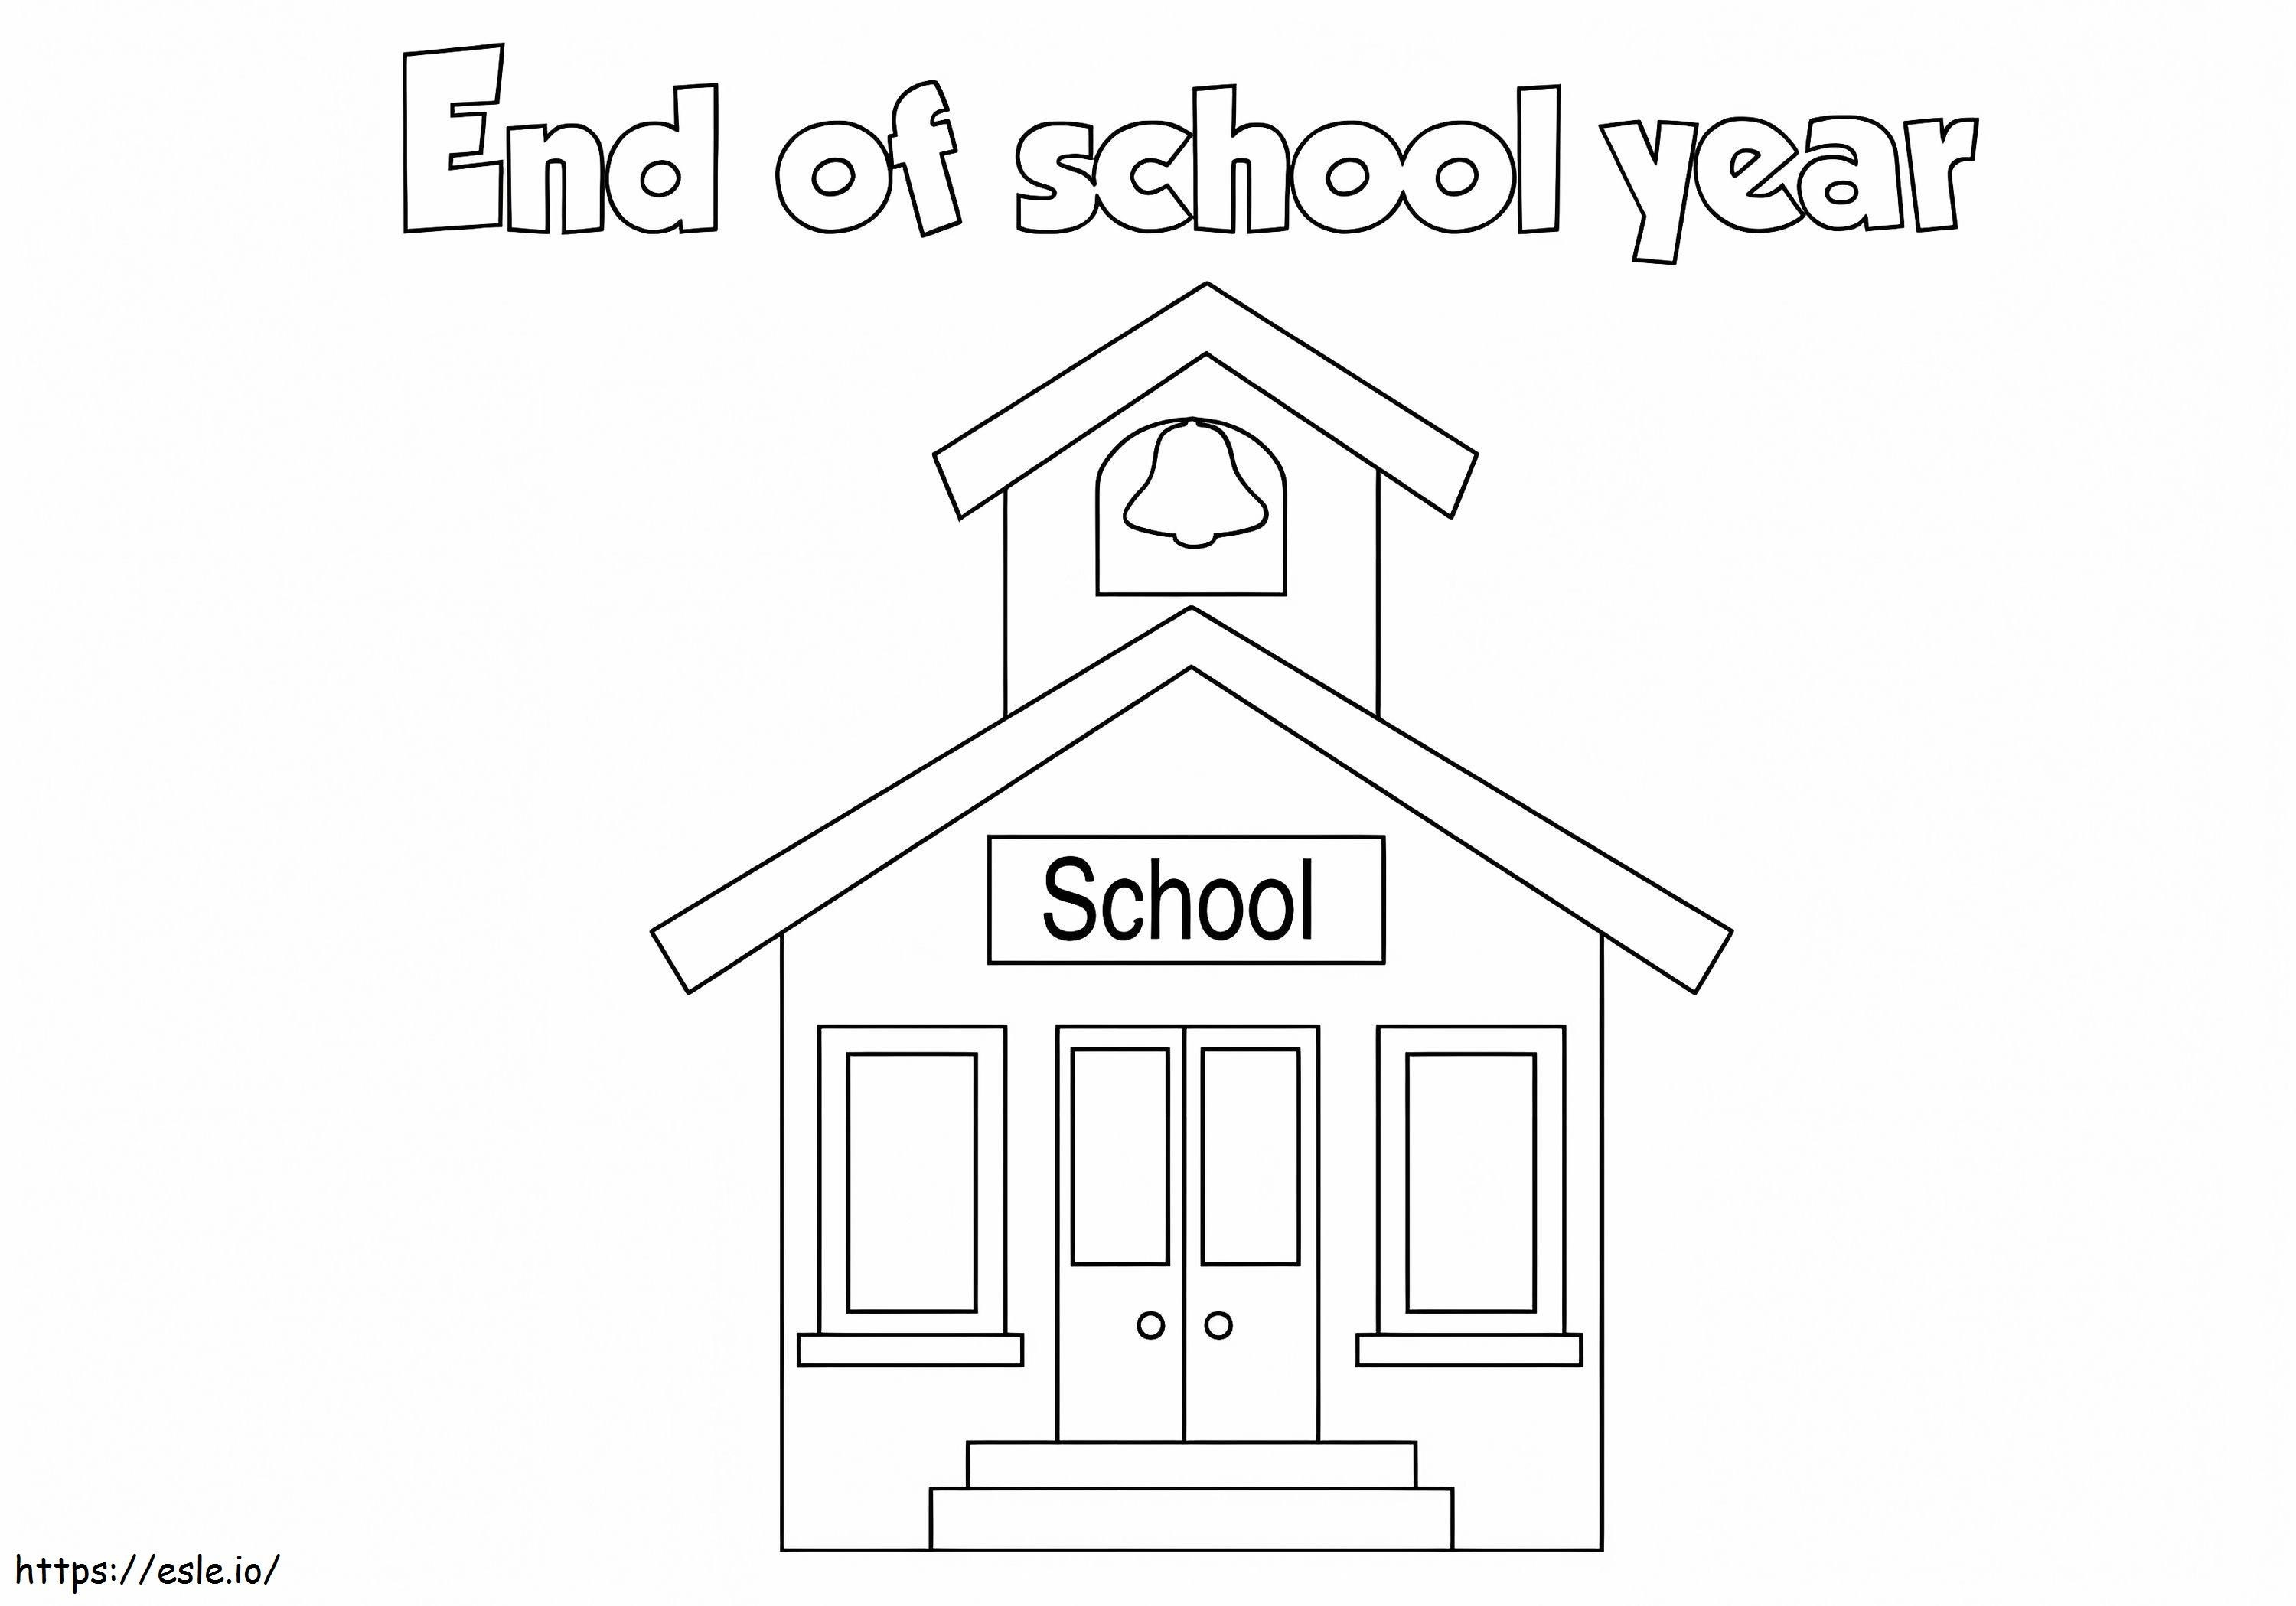 End Of School Year coloring page